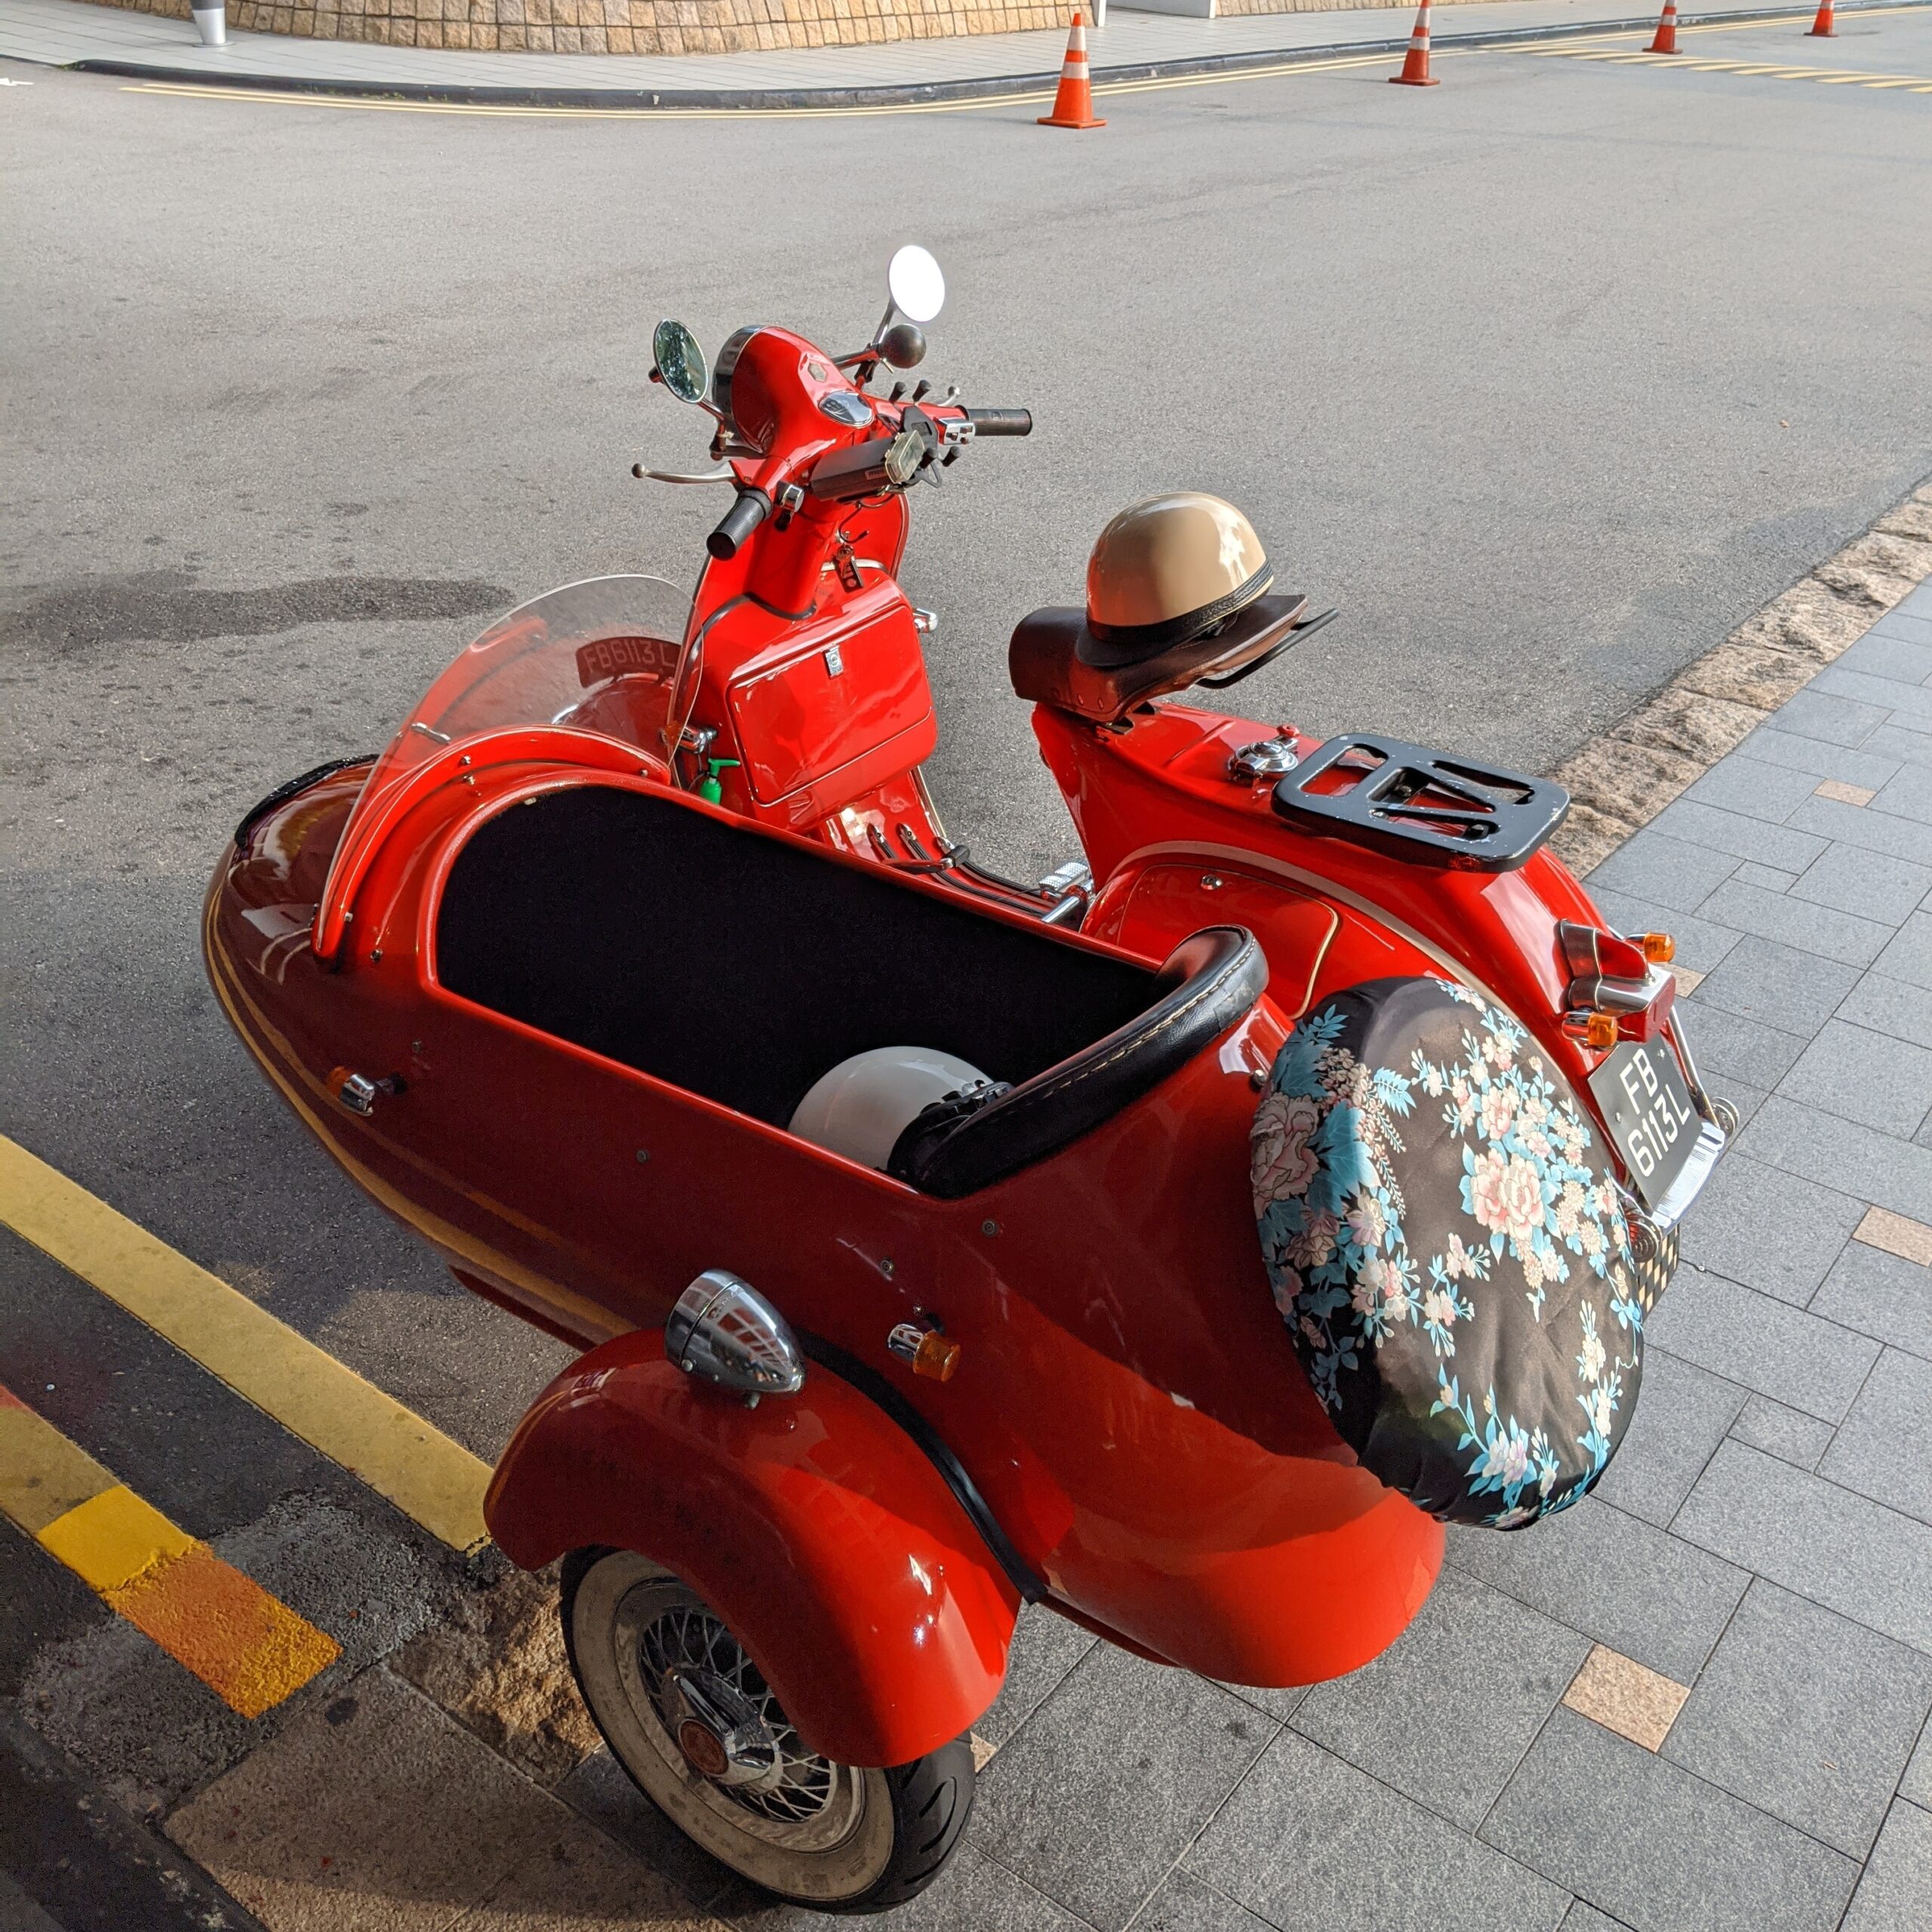 S'pore boyfriend rents Vespa with sidecar for romantic anniversary, gets  girlfriend drenched in rain -  - News from Singapore, Asia and  around the world